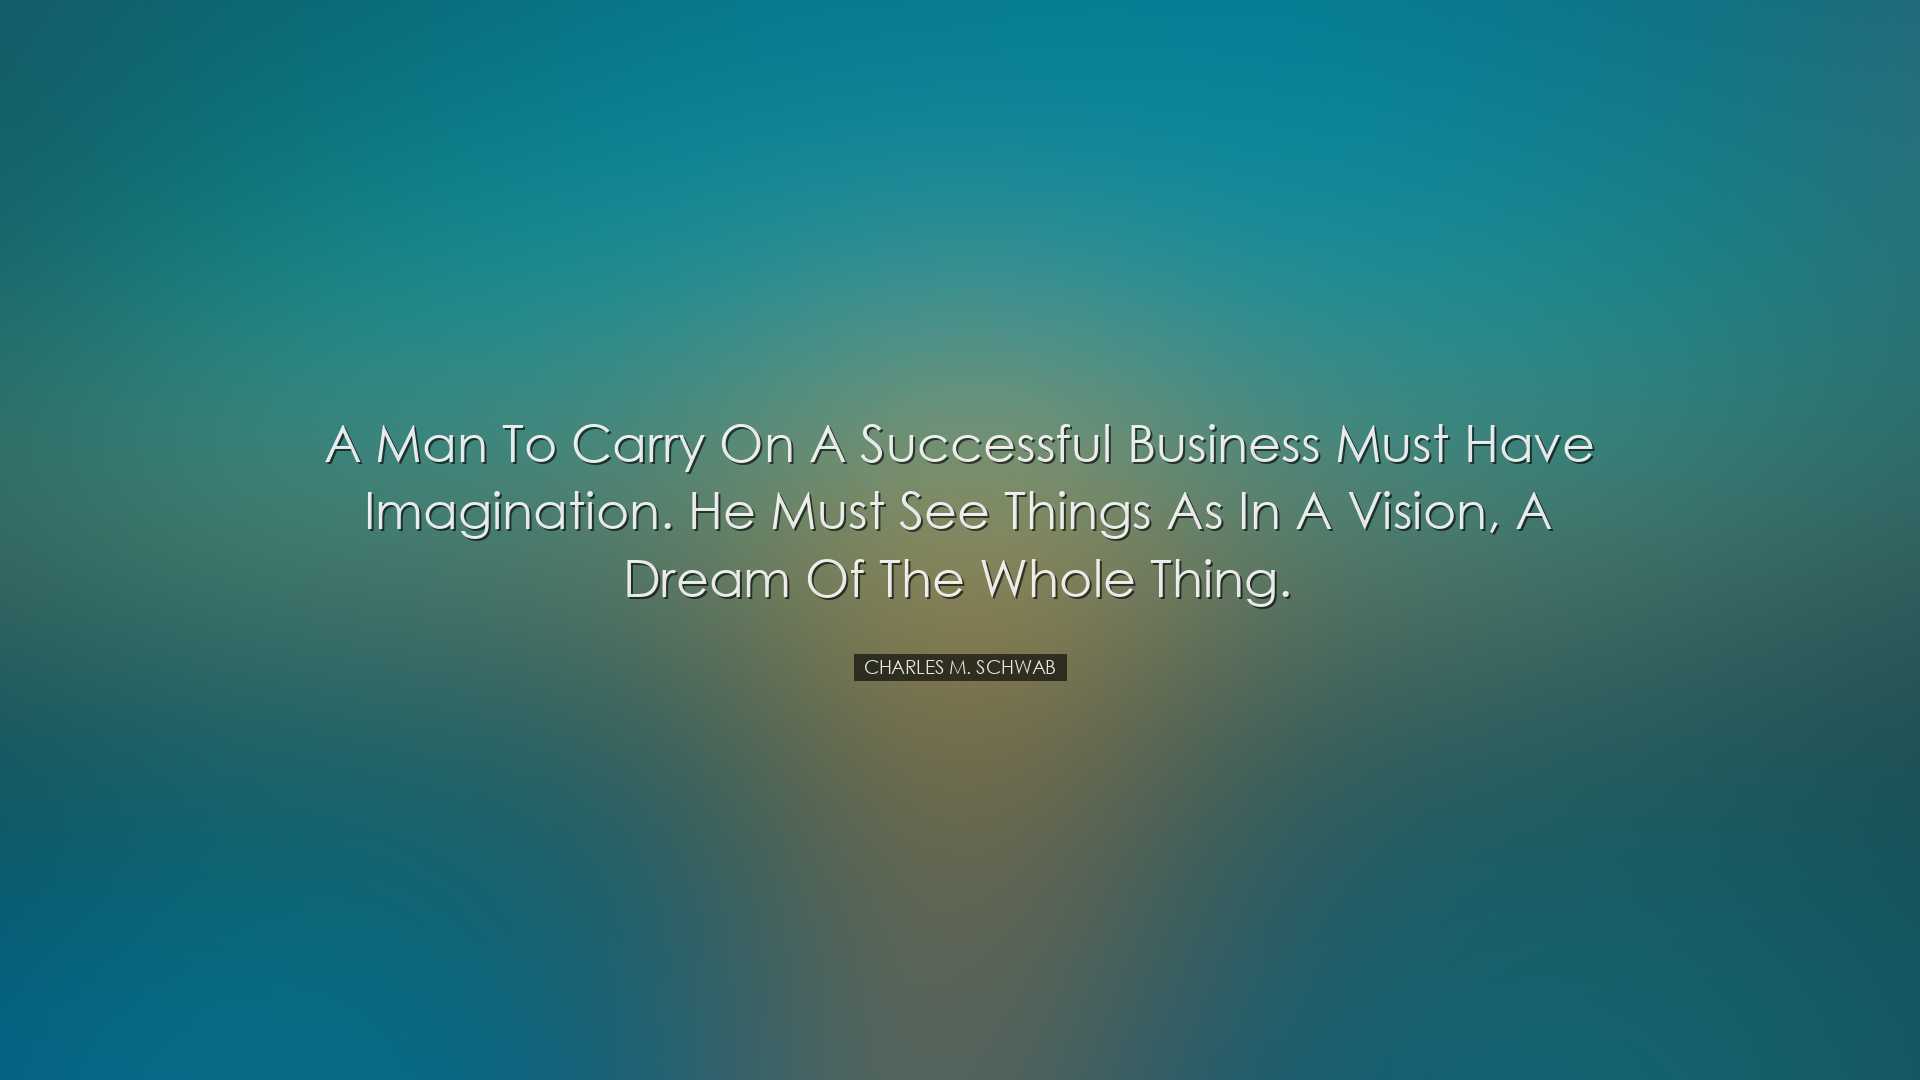 A man to carry on a successful business must have imagination. He